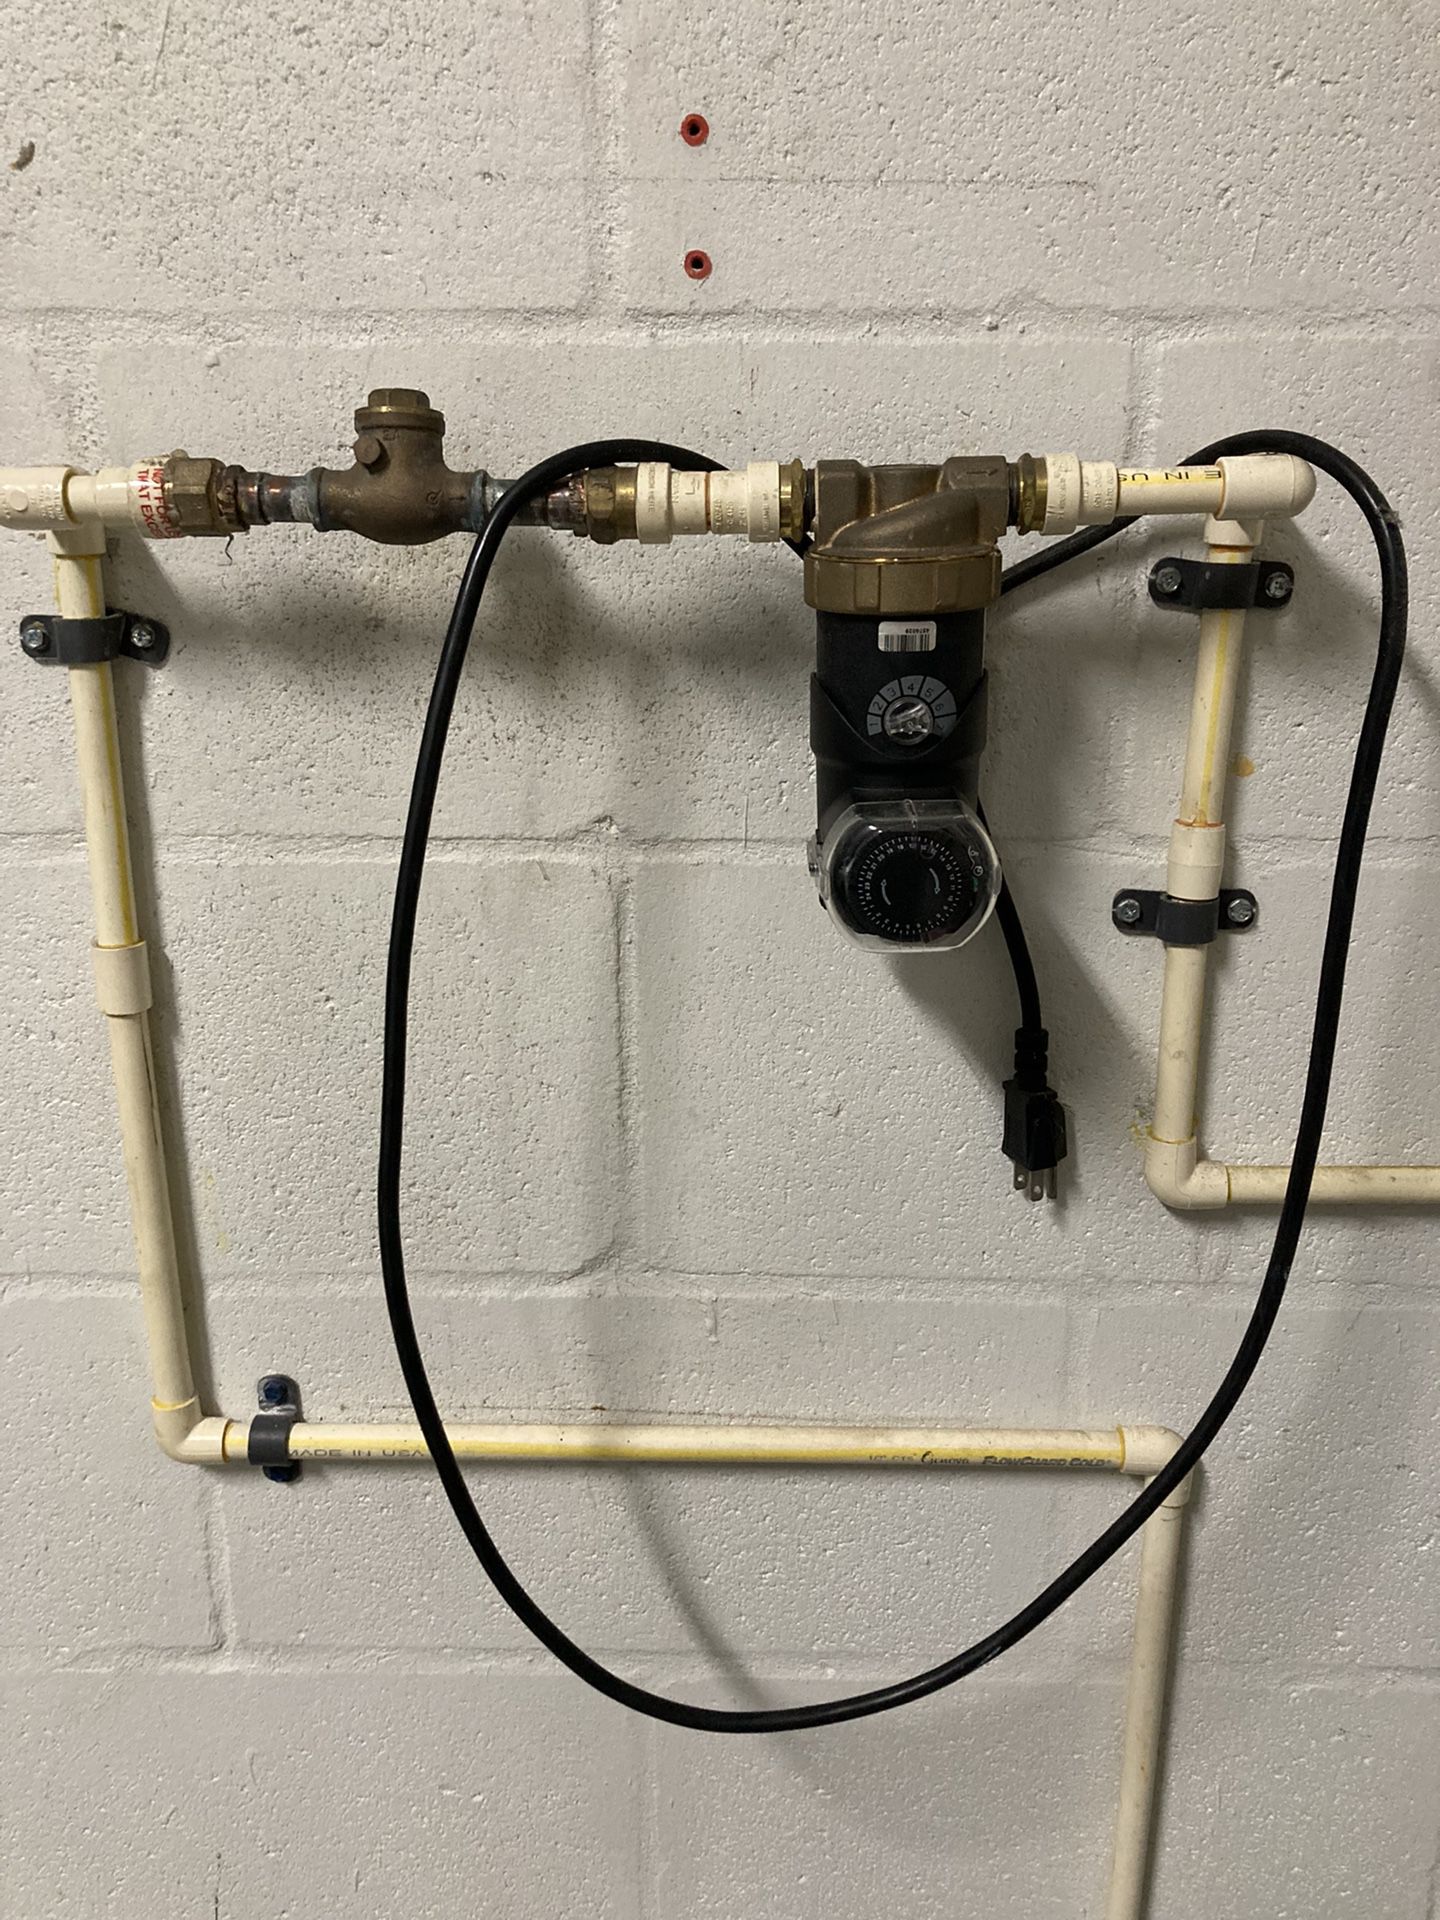 Hot Water Recirculating System for Sale in Brandon, FL OfferUp